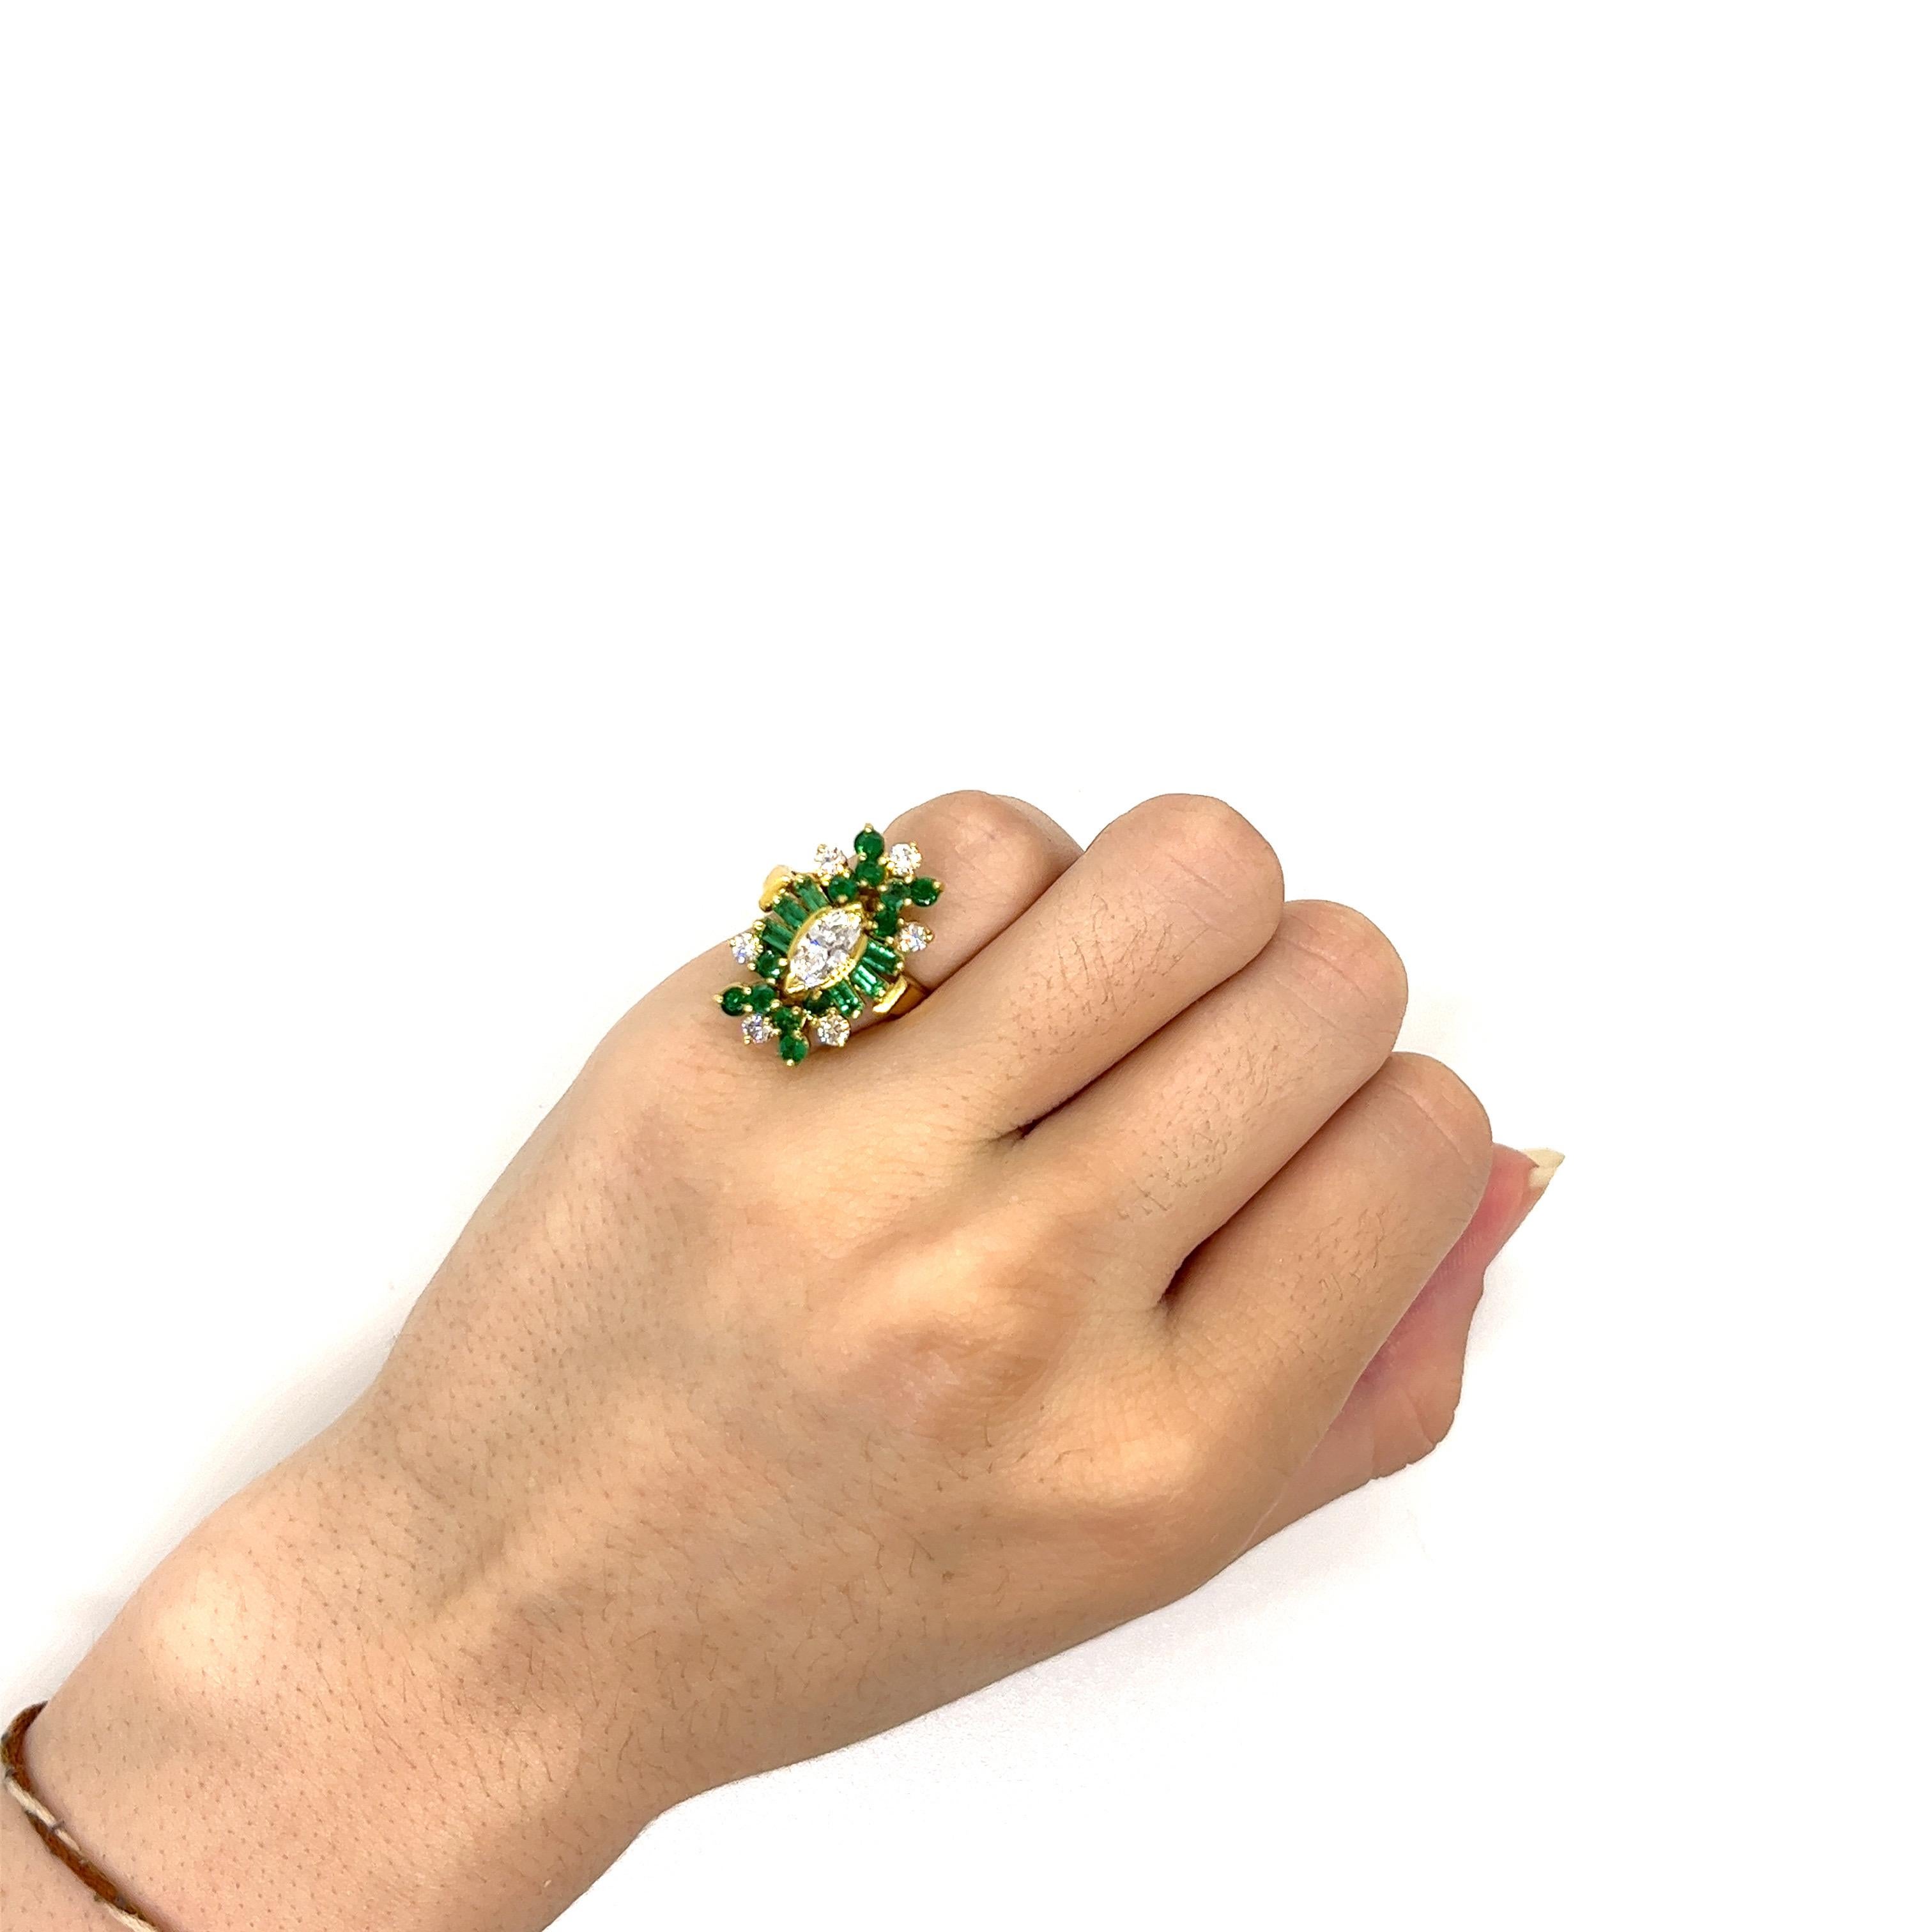 Women's Vintage 18k yellow gold Victorian Reproduction Diamond and Emerald Ring For Sale